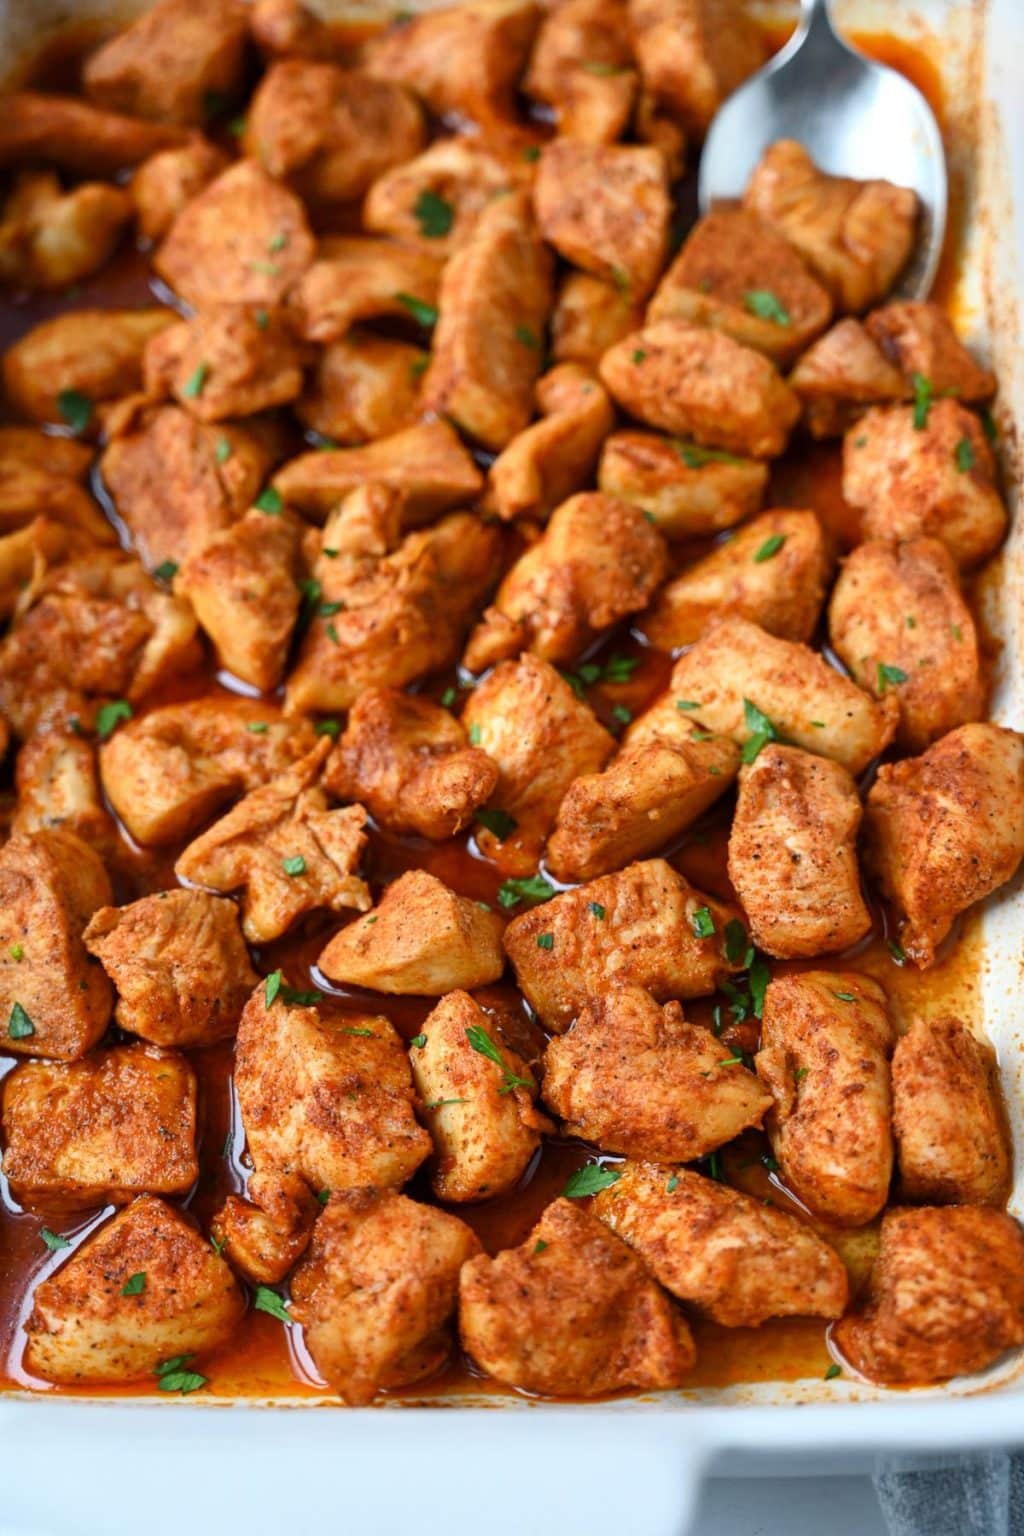 Baked Spicy Chicken Bites - Amee's Savory Dish